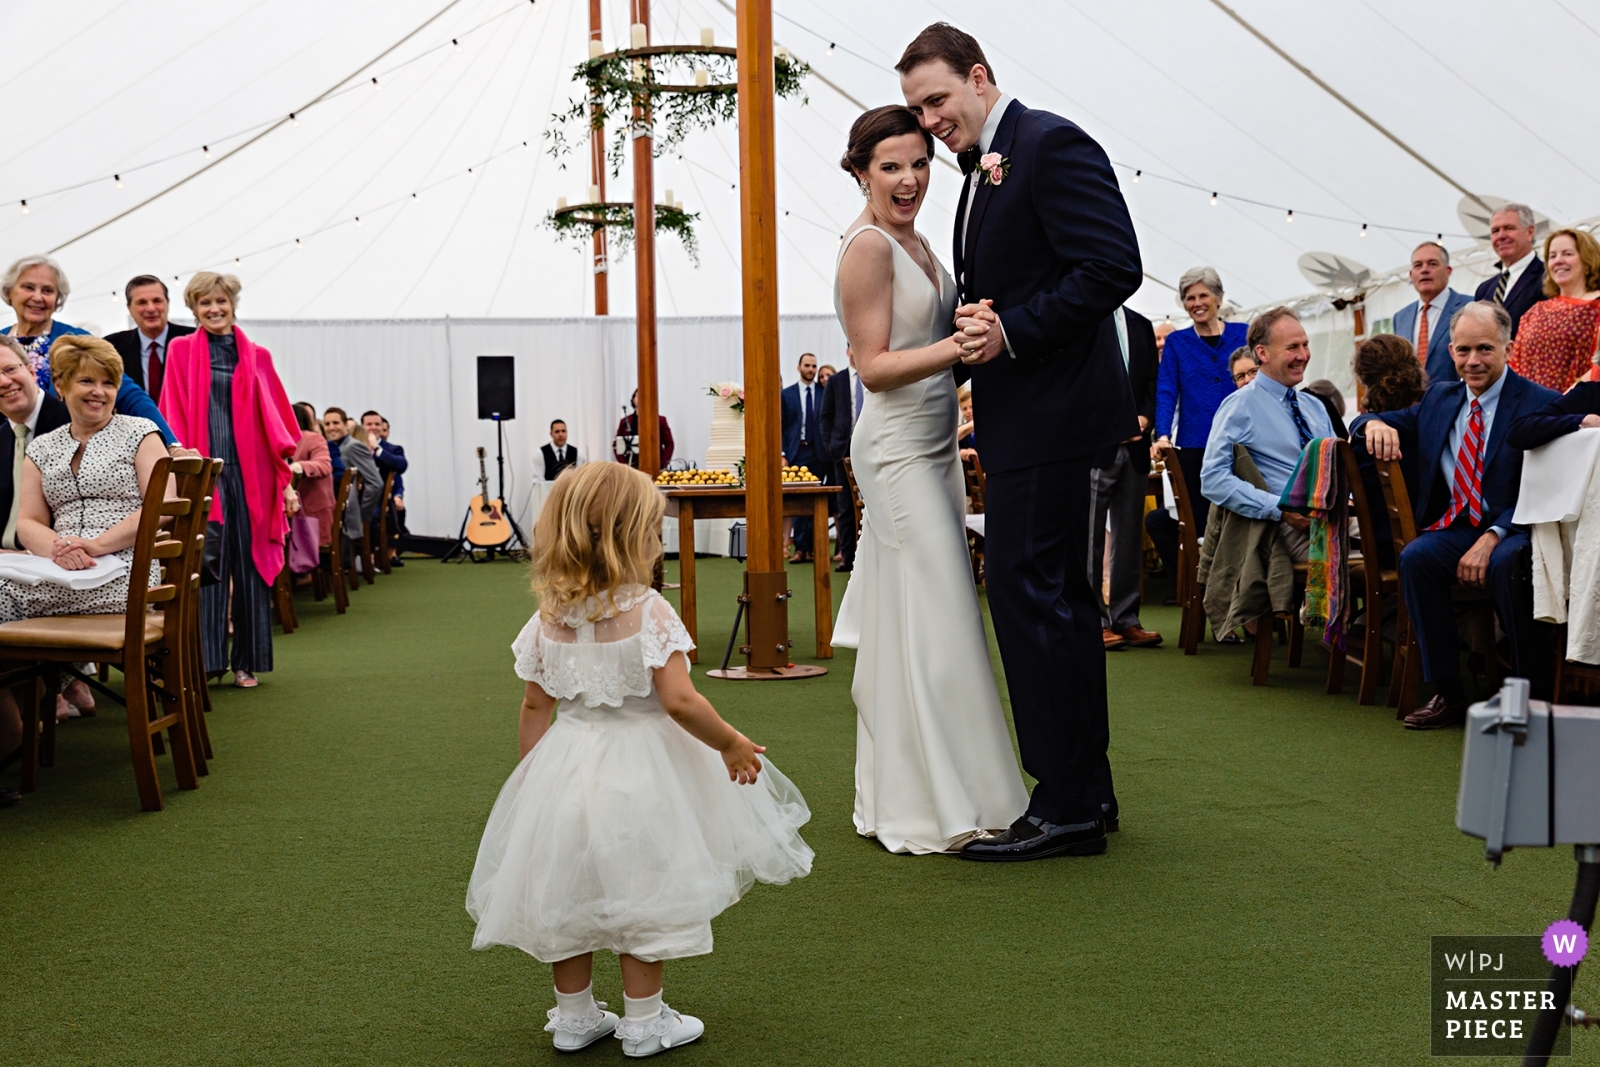 Award winning Hardy Farm Wedding Photographer capturing the bride and groom laughing at the flower girl during their first dance at their Maine wedding